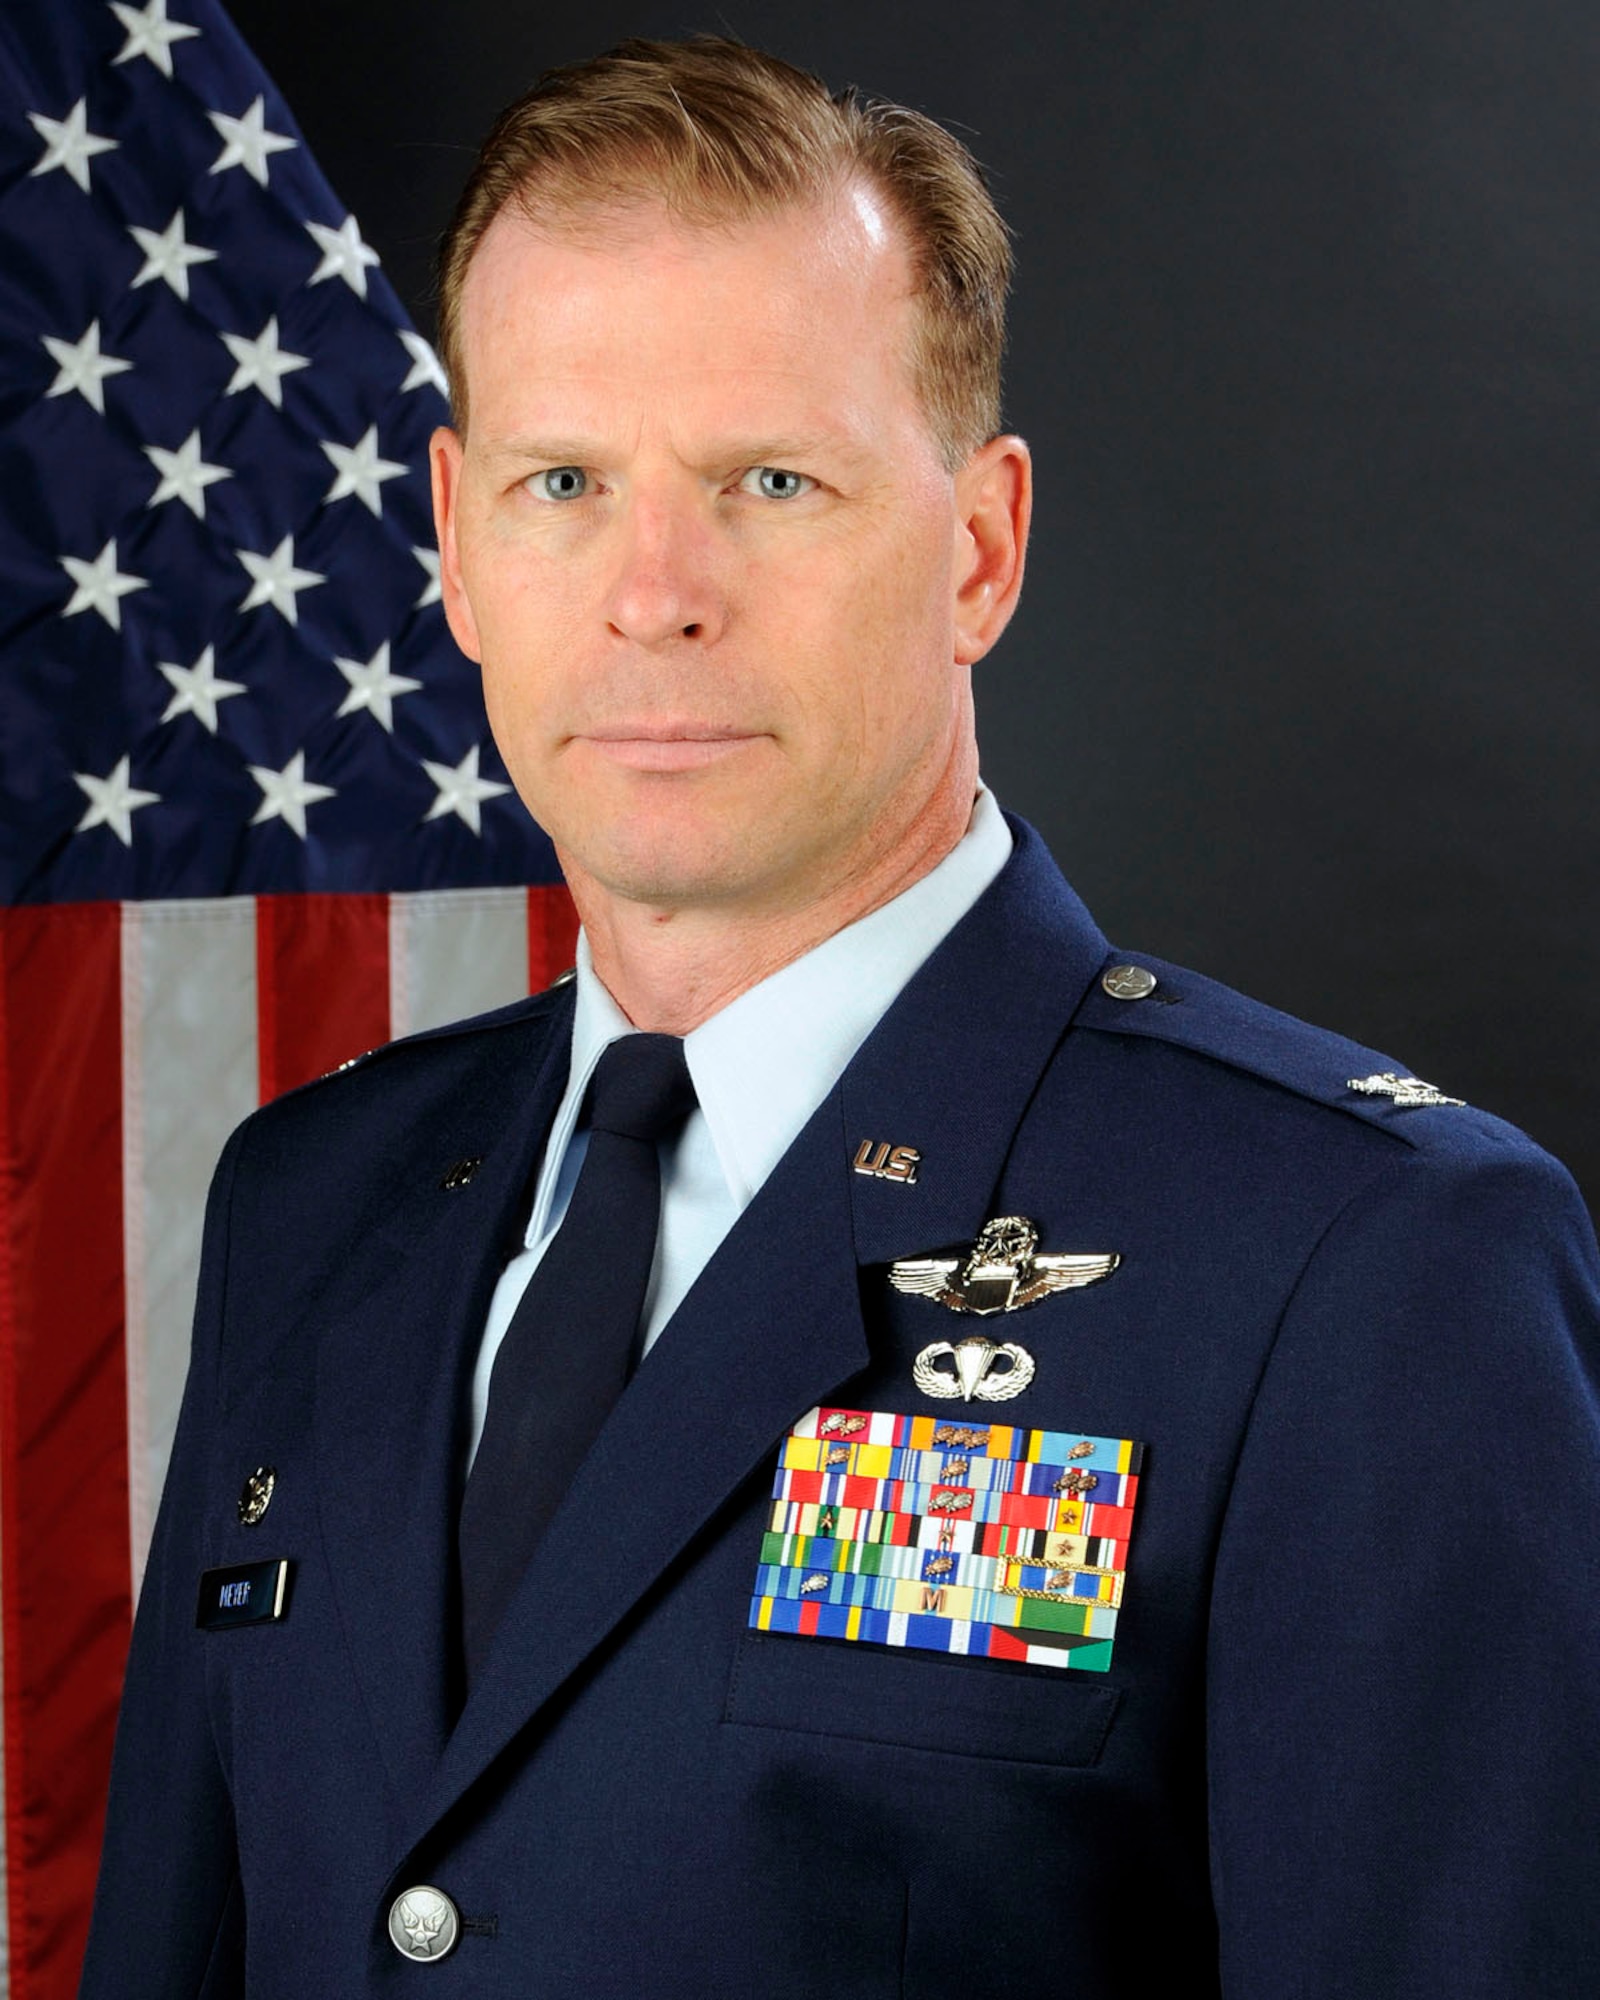 U.S. Air Force Col. David Meyer, 169th Operations Group commander at McEntire Joint National Guard Base, South Carolina Air National Guard, poses for his portrait June 11, 2013.(U.S. Air National Guard photo by Tech. Sgt. Caycee Watson/Released)